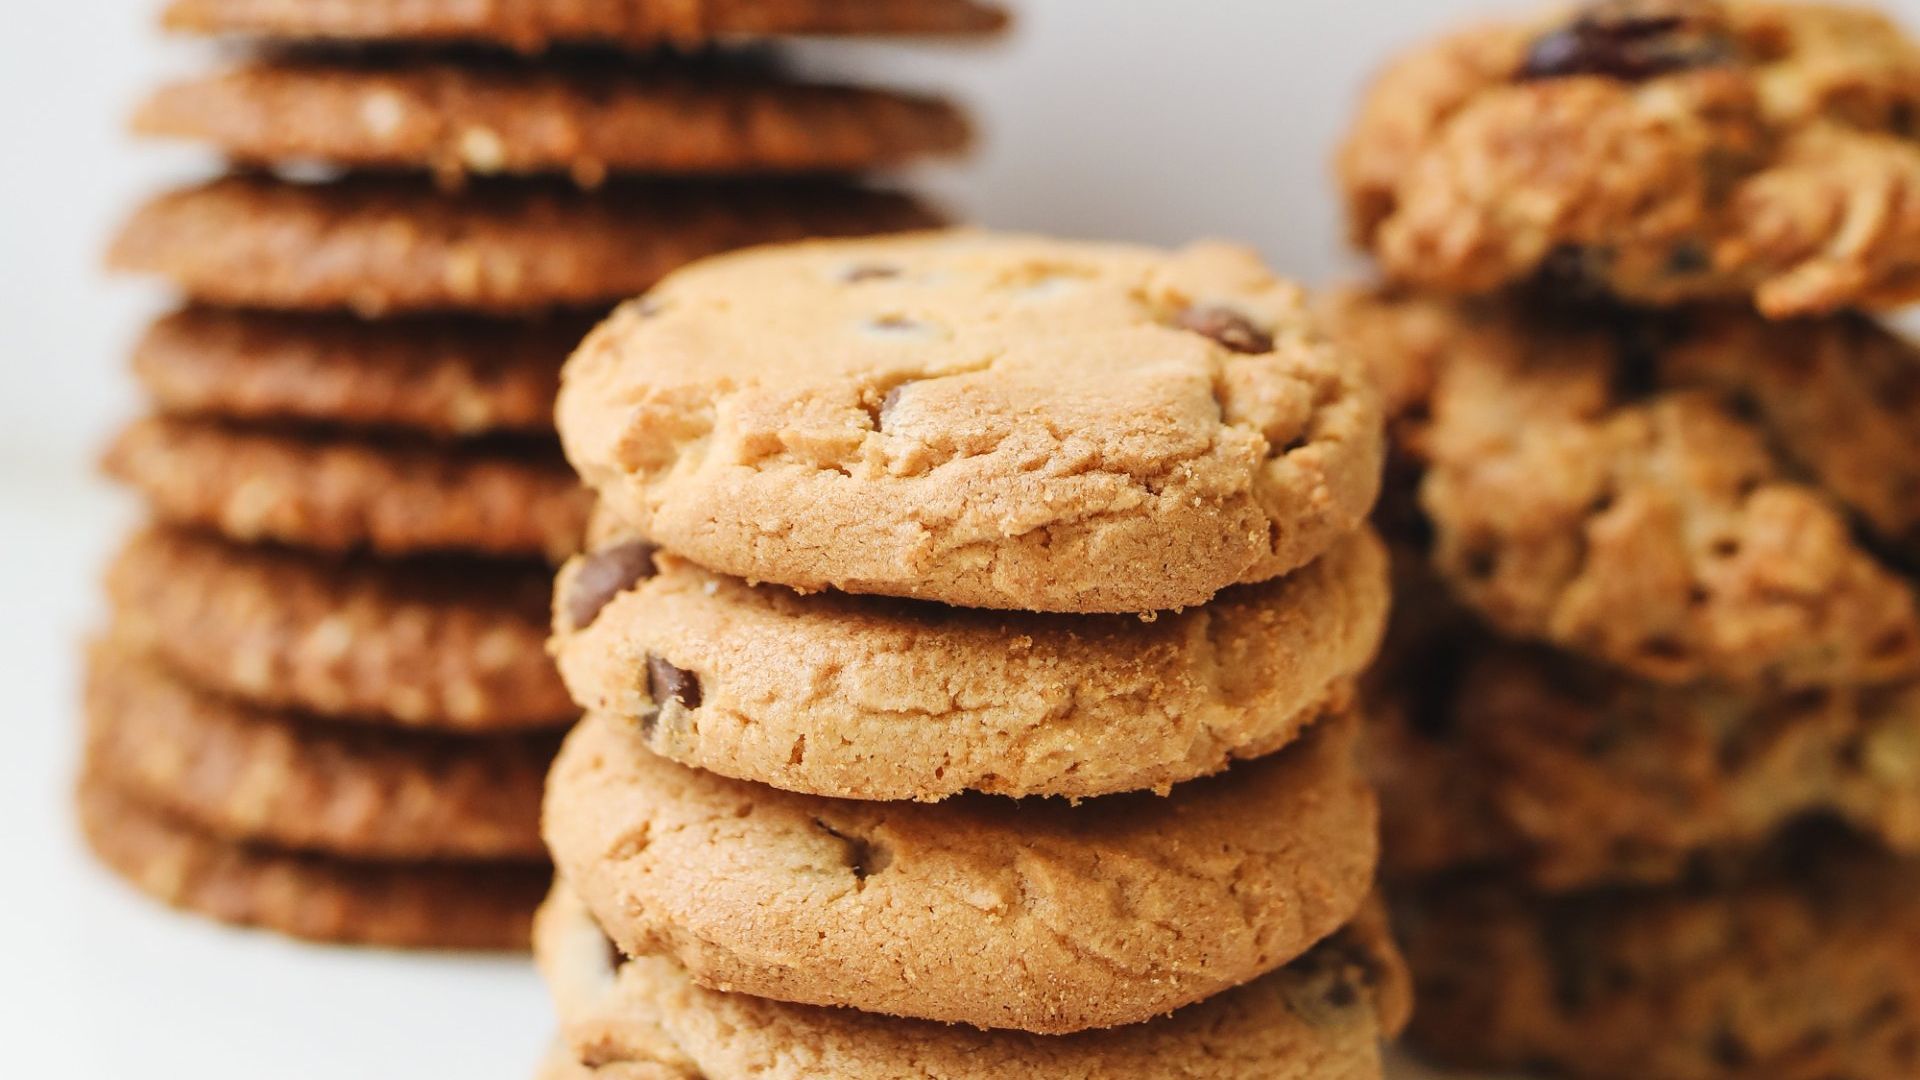 A close up of a stack of chocolate chip cookies on a table.